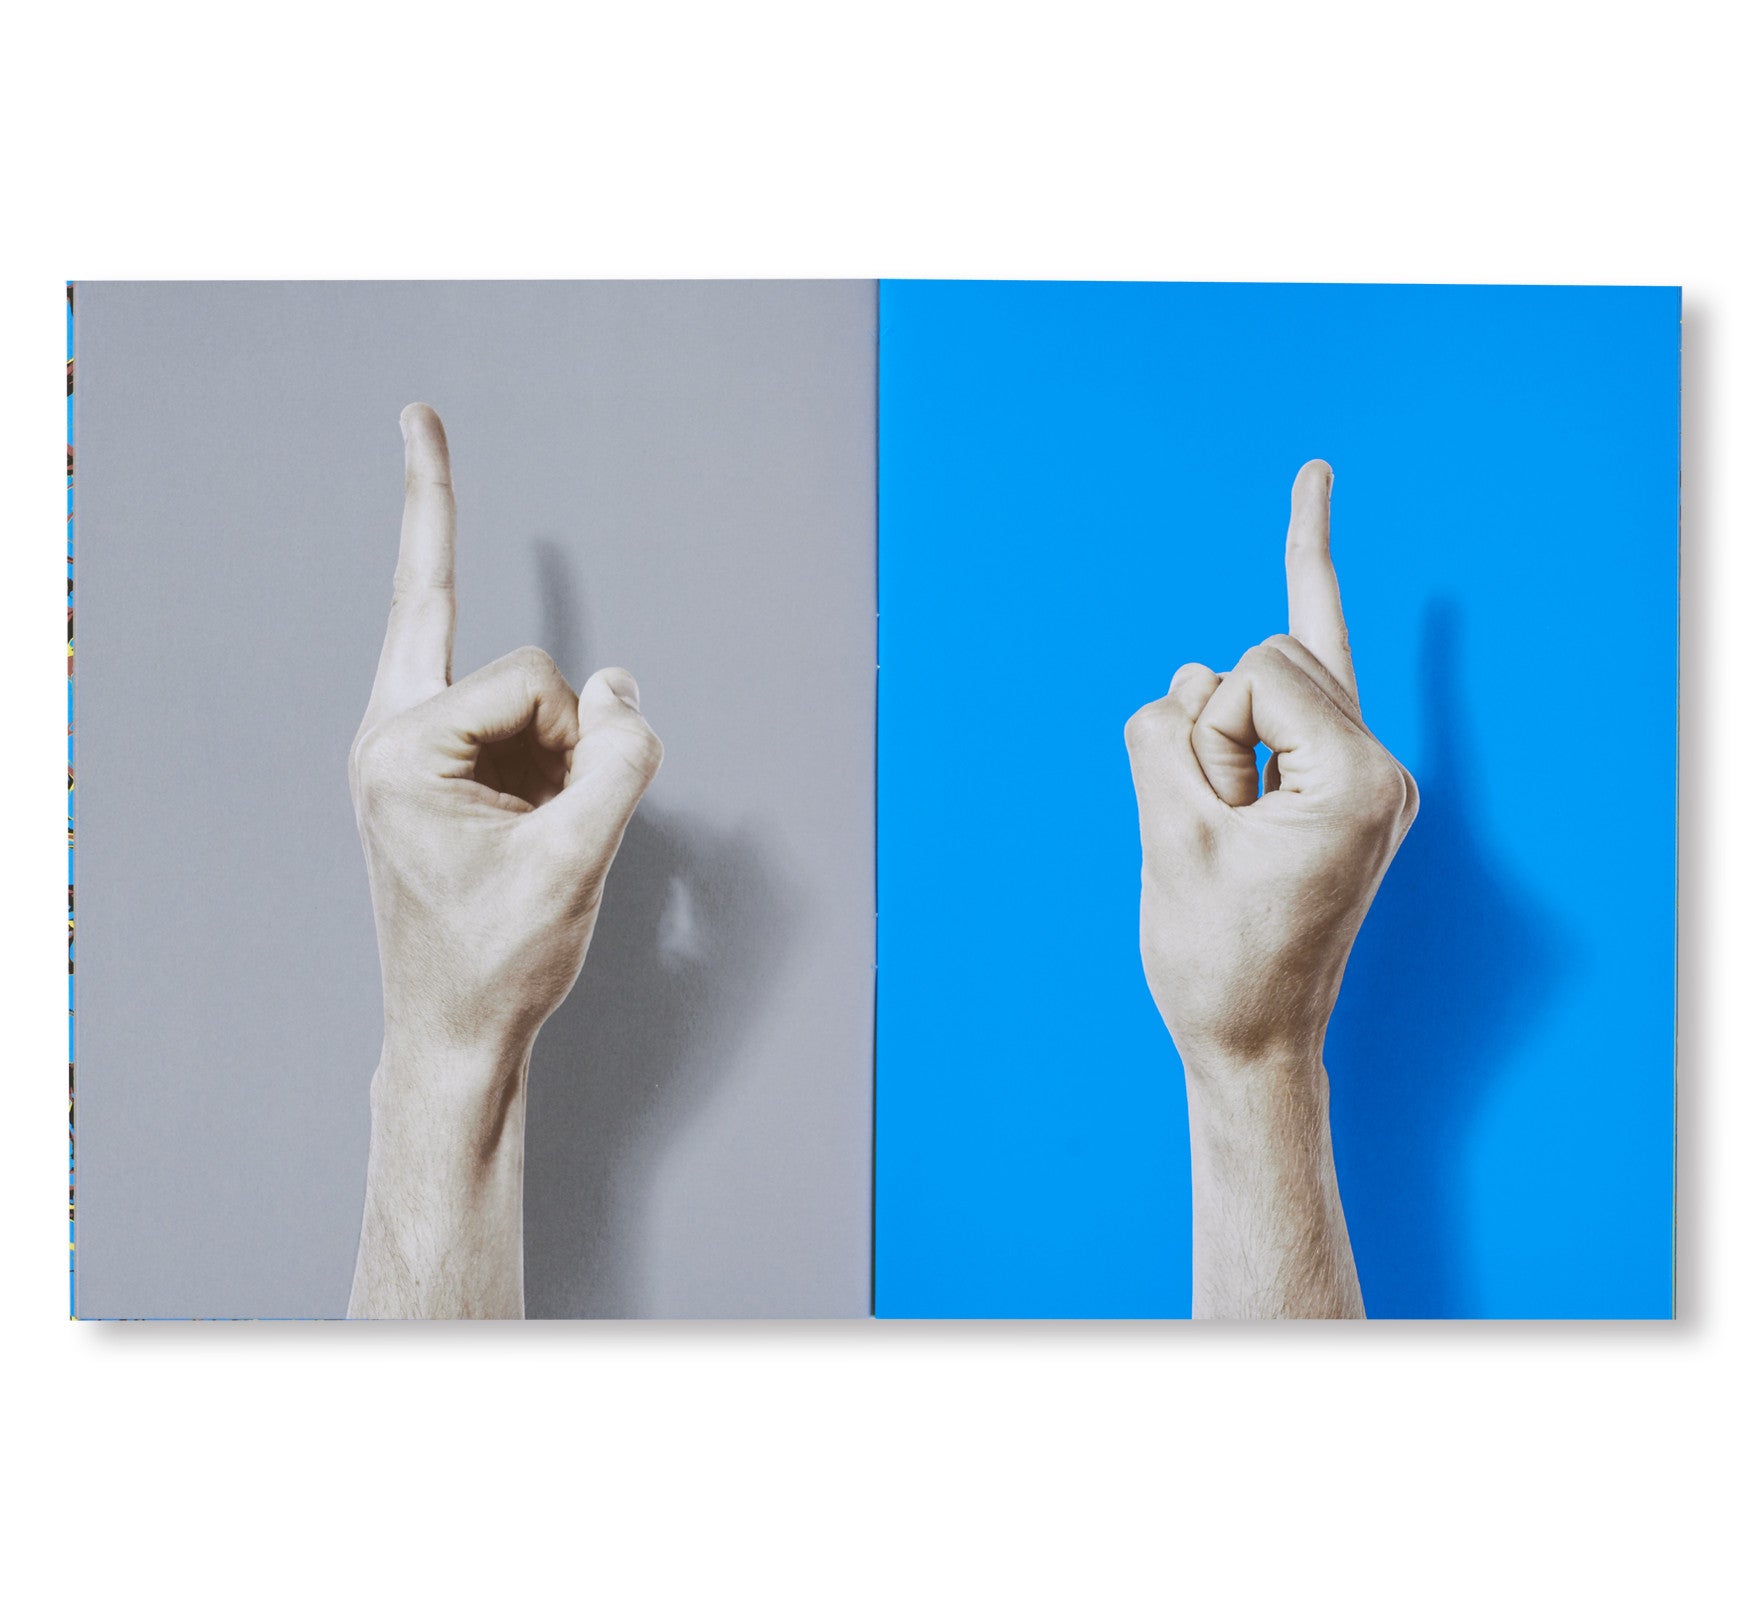 FEELING WITH FINGERS THAT SEE by Stuart Whipps